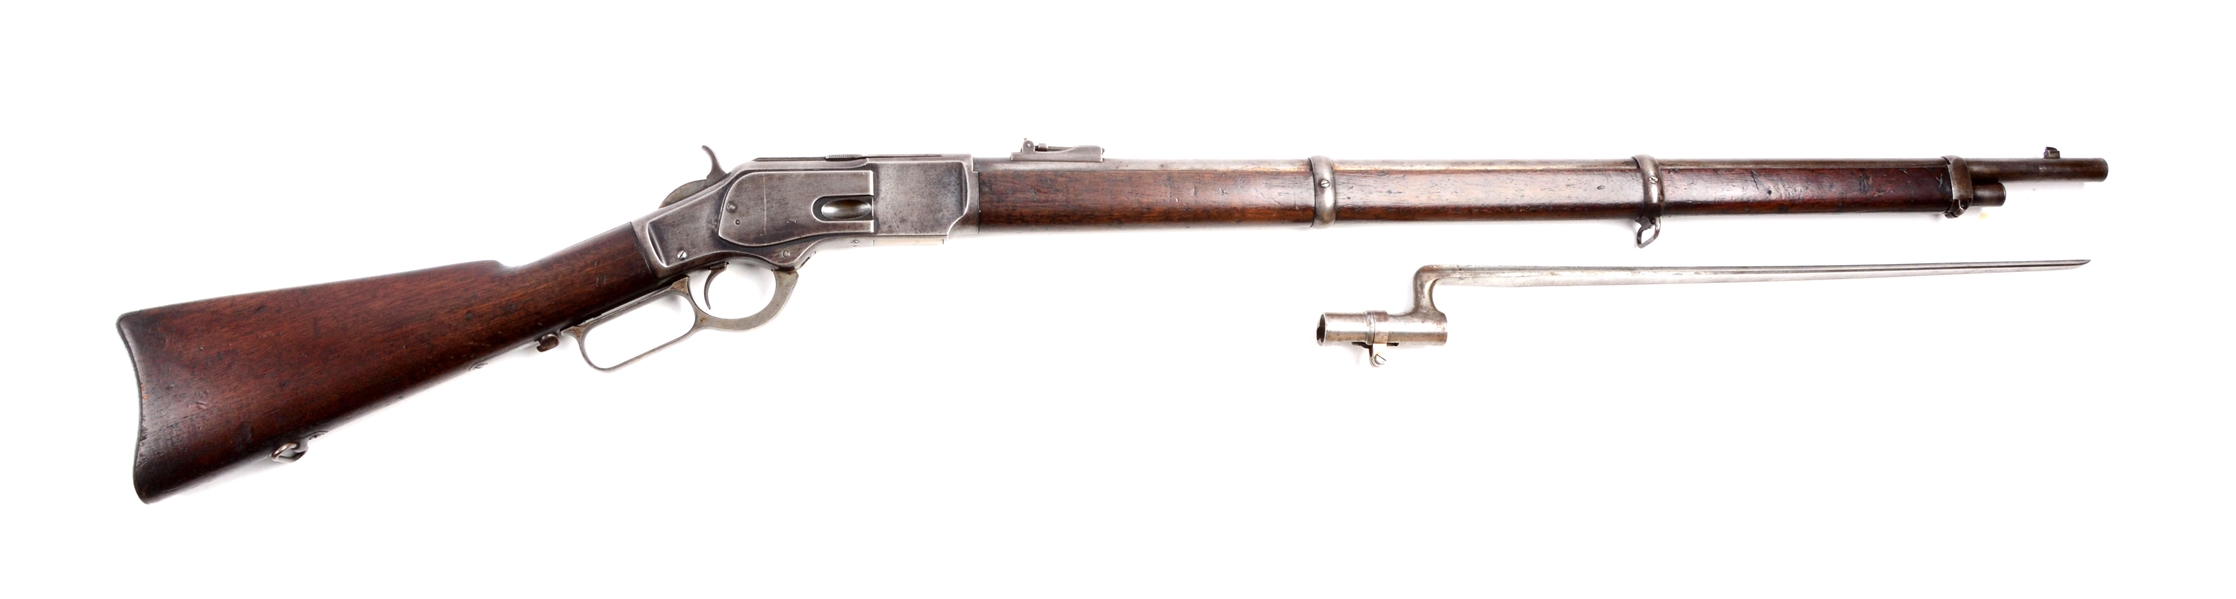 (A) WINCHESTER MODEL 1873 MUSKET WITH BAYONET.